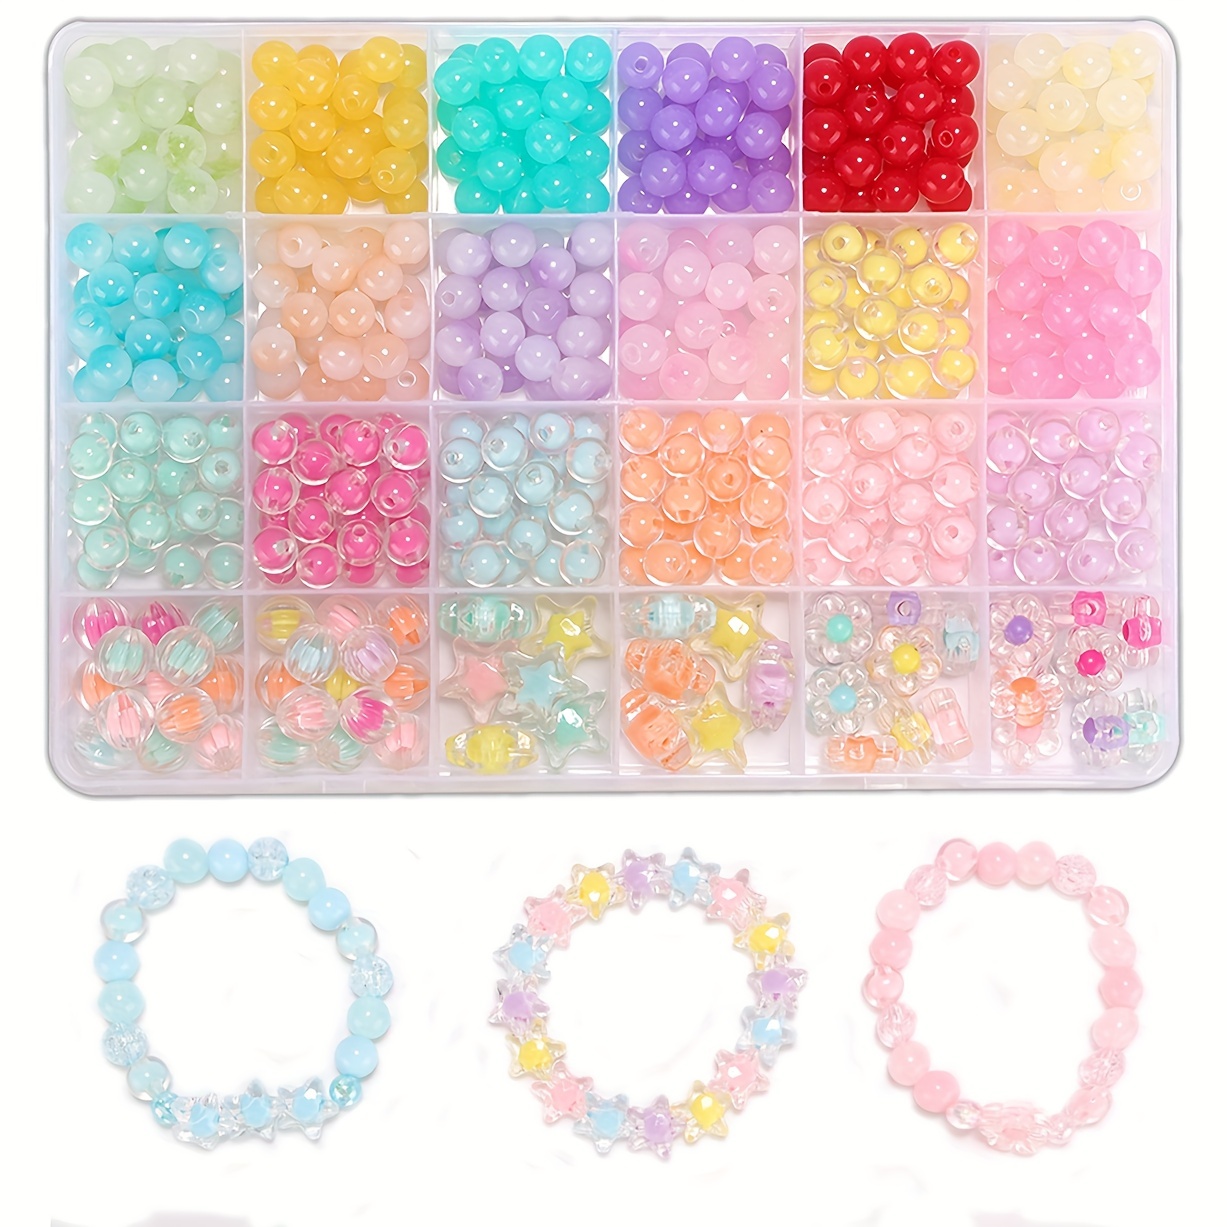 1 Box, Round Glass Crackle & Acrylic Beads Set, 8mm 24 Colors Imitation  Crystal Beads Kit, For DIY Bracelet Making For Beginners Girls DIY Crafts